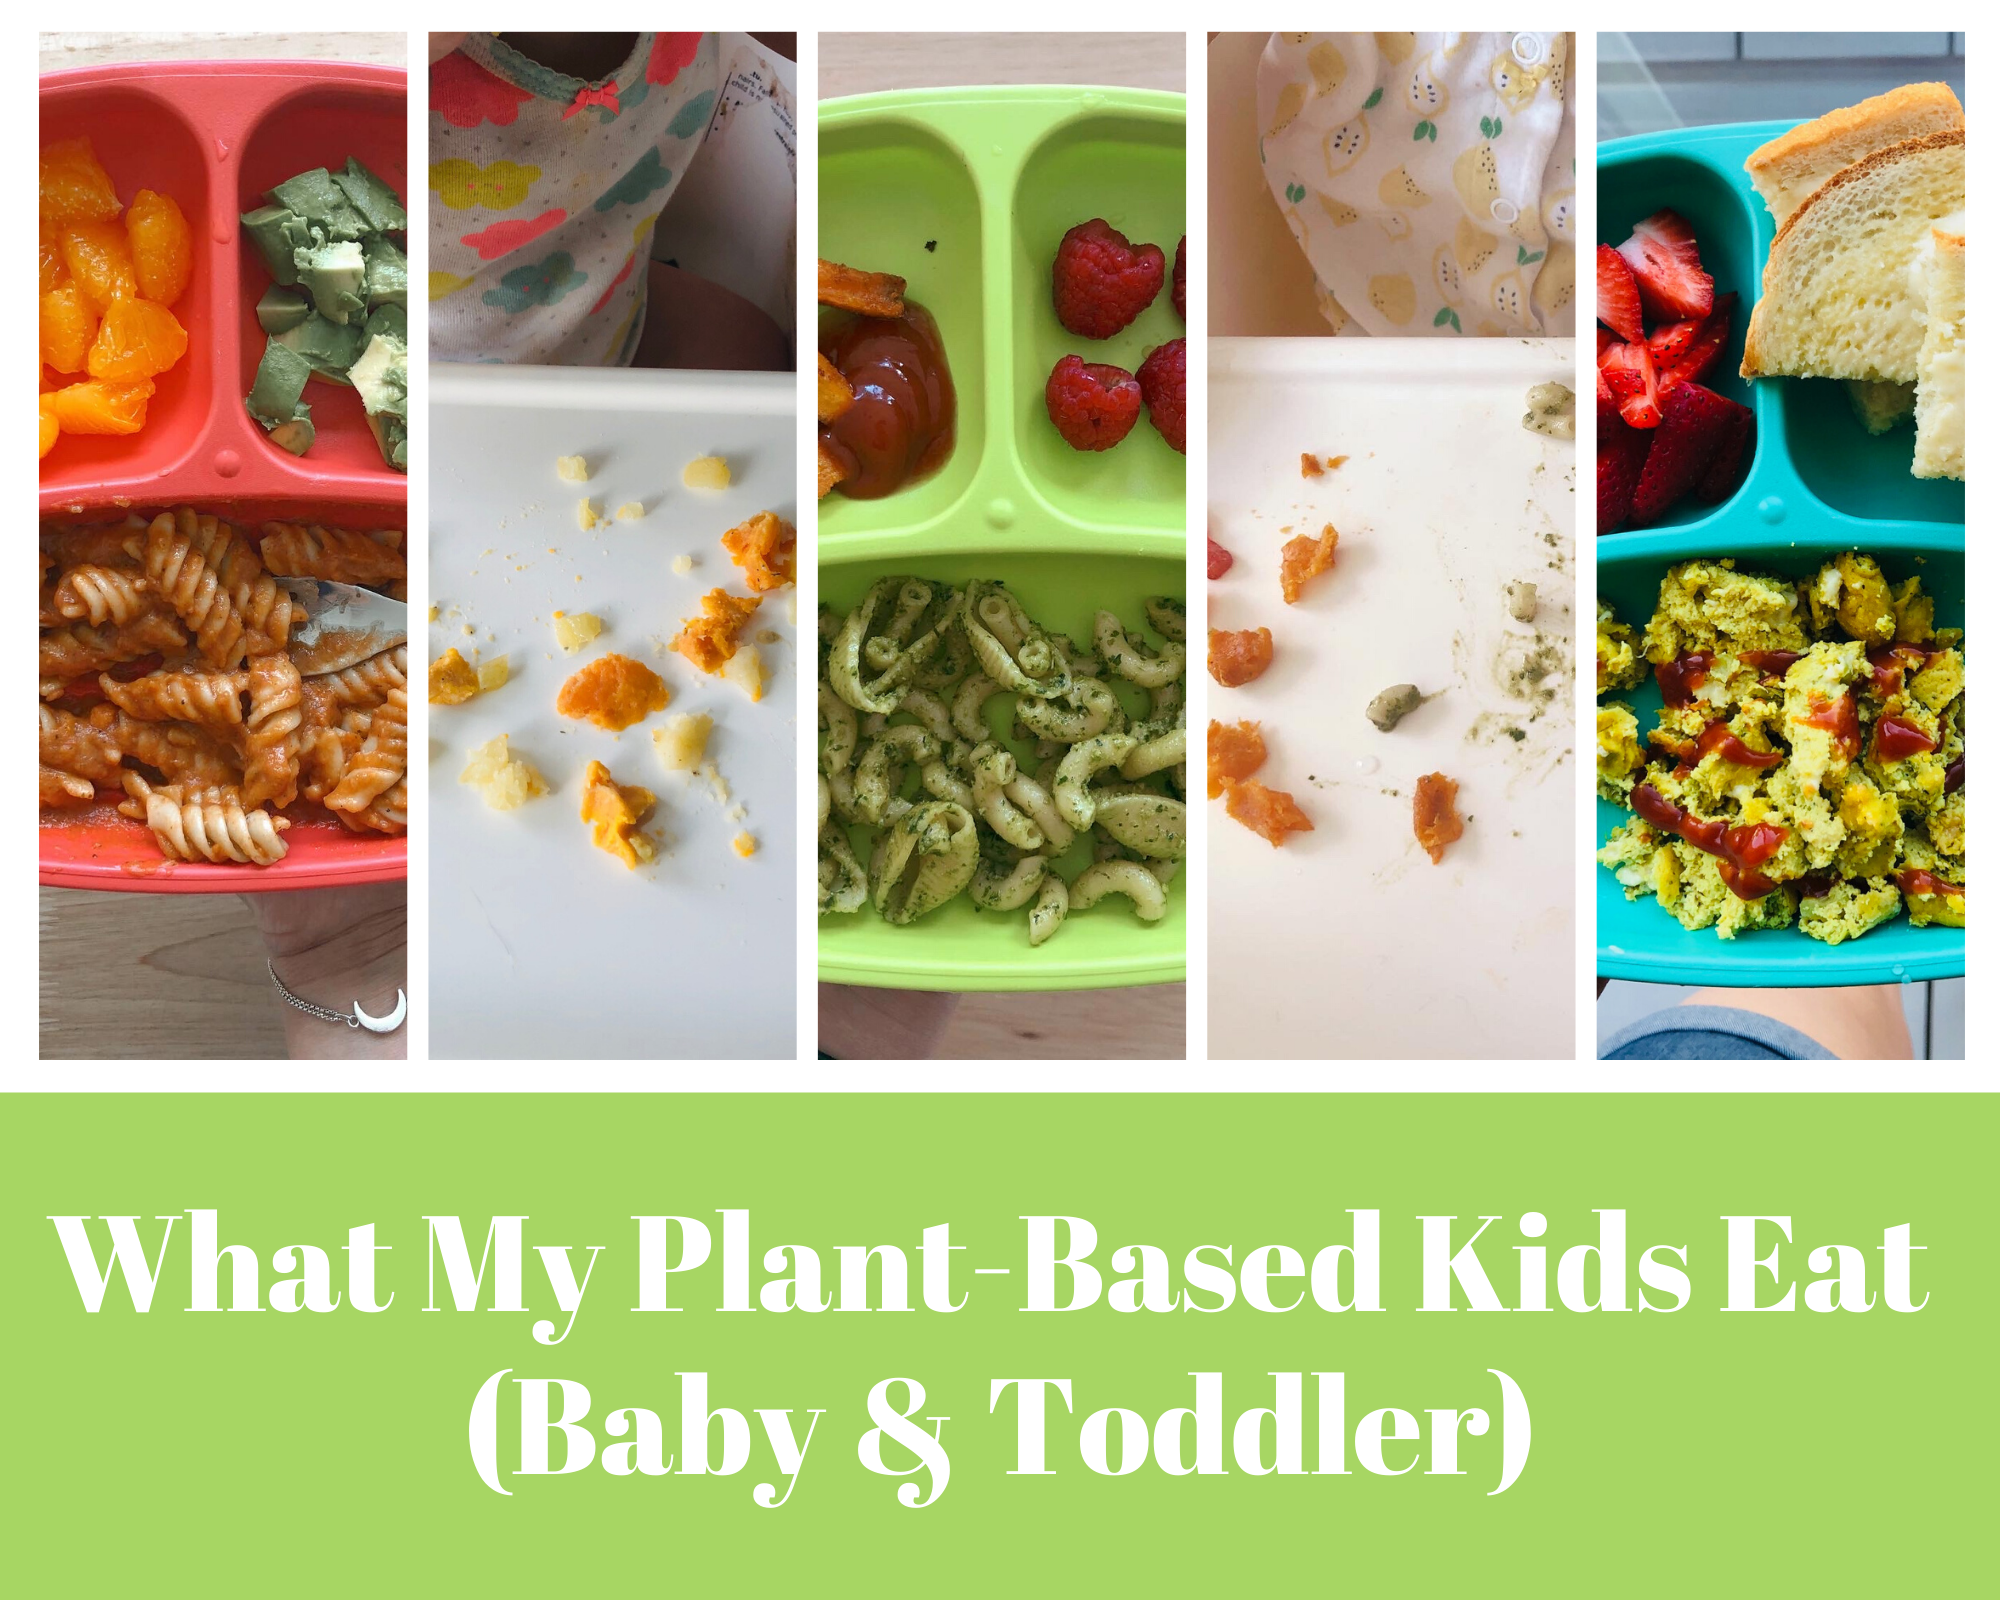 What My Plant-Based Kids Eat (Baby & Toddler)